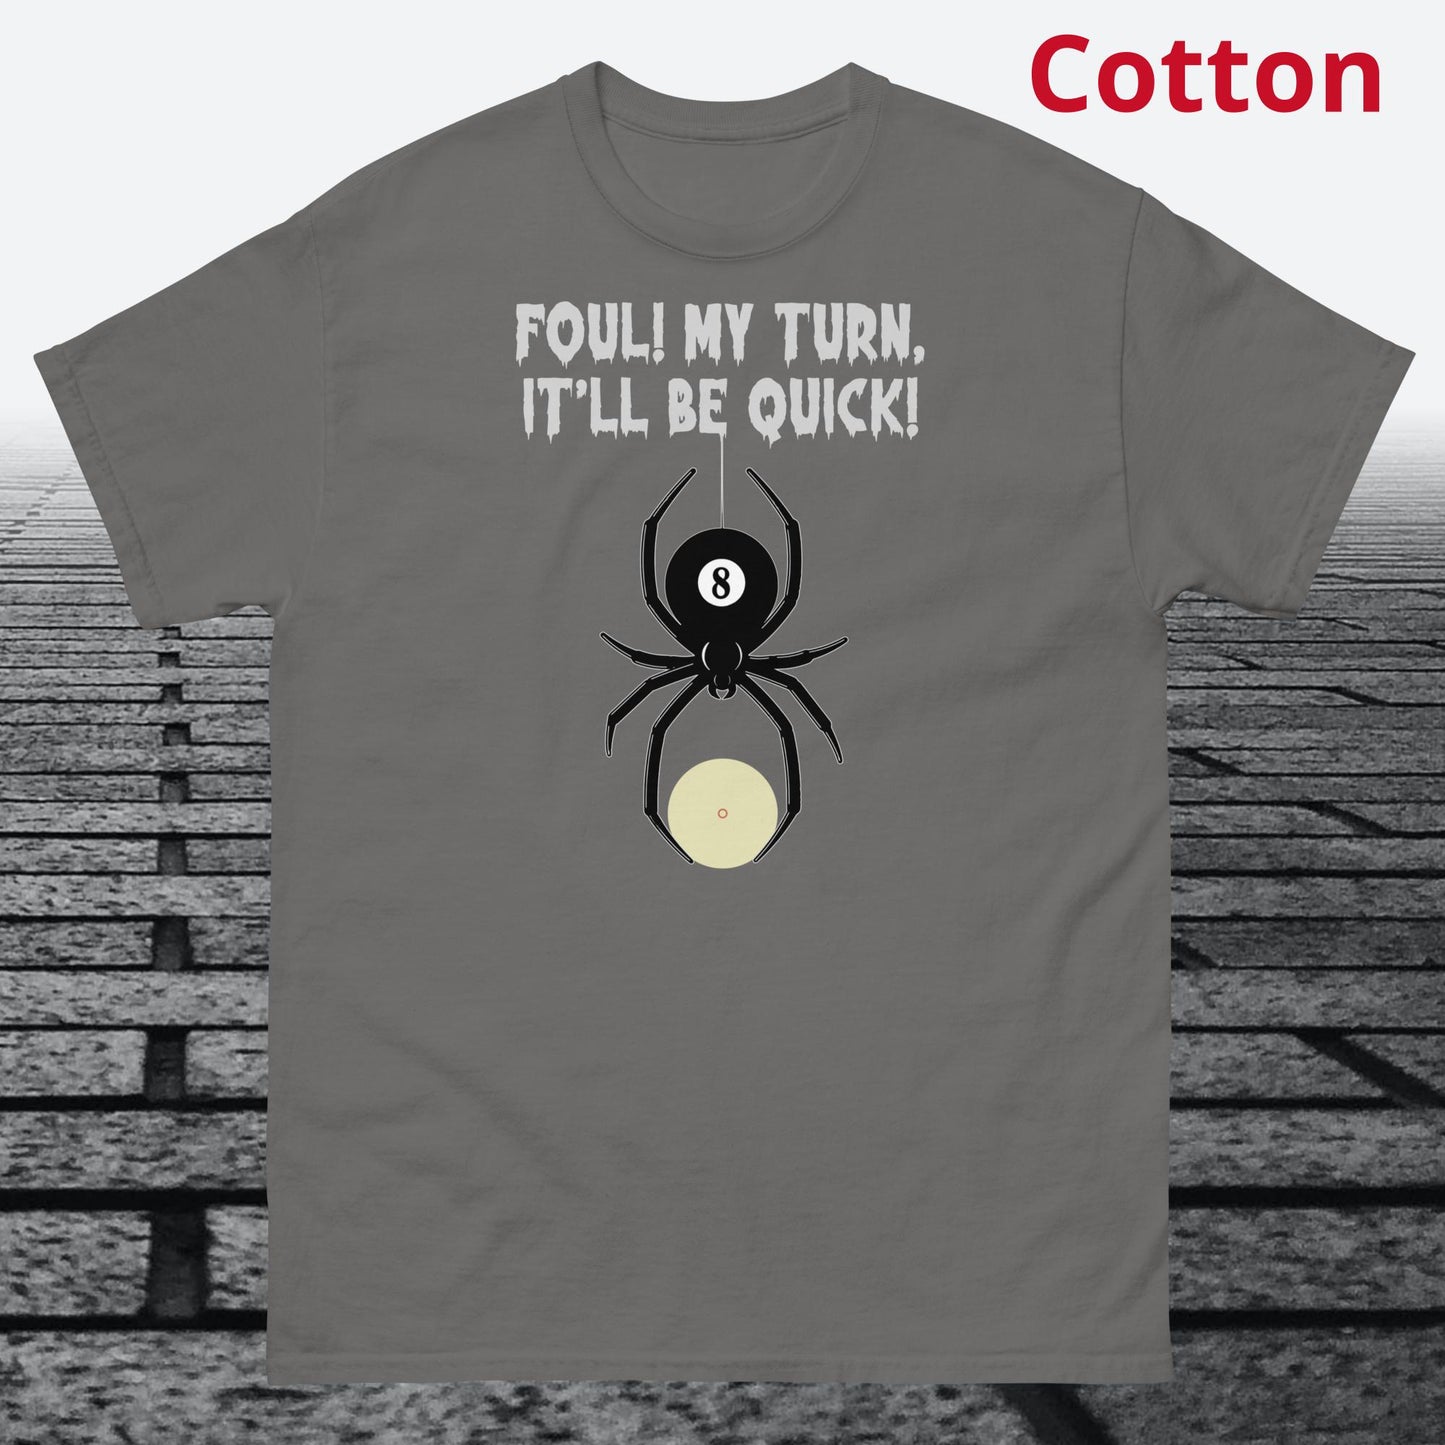 Foul, my Turn, It'll be Quick, on front of shirt, Cotton T-shirt